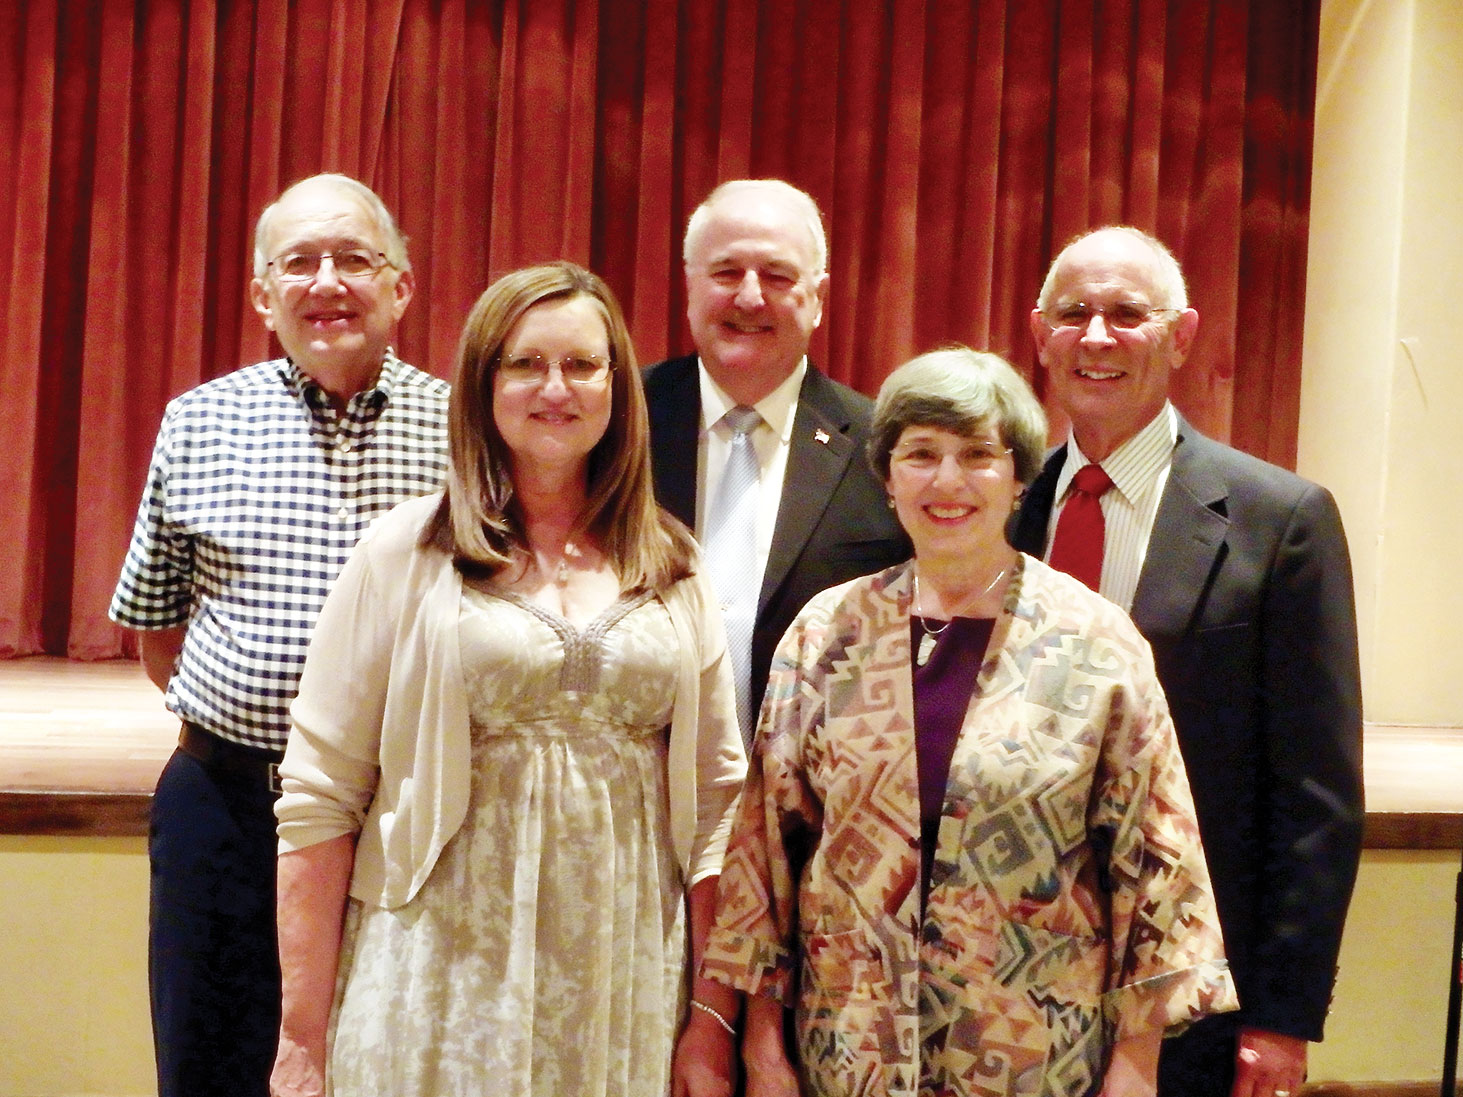 PC Singers has elected new officers for the 2016-2017 season. Front row: Debby Dennington, treasurer, and Diane Piehl, secretary; back row: Walter Kalback, vice-president, Ray Hadden, past-president and Larry Eidt, president